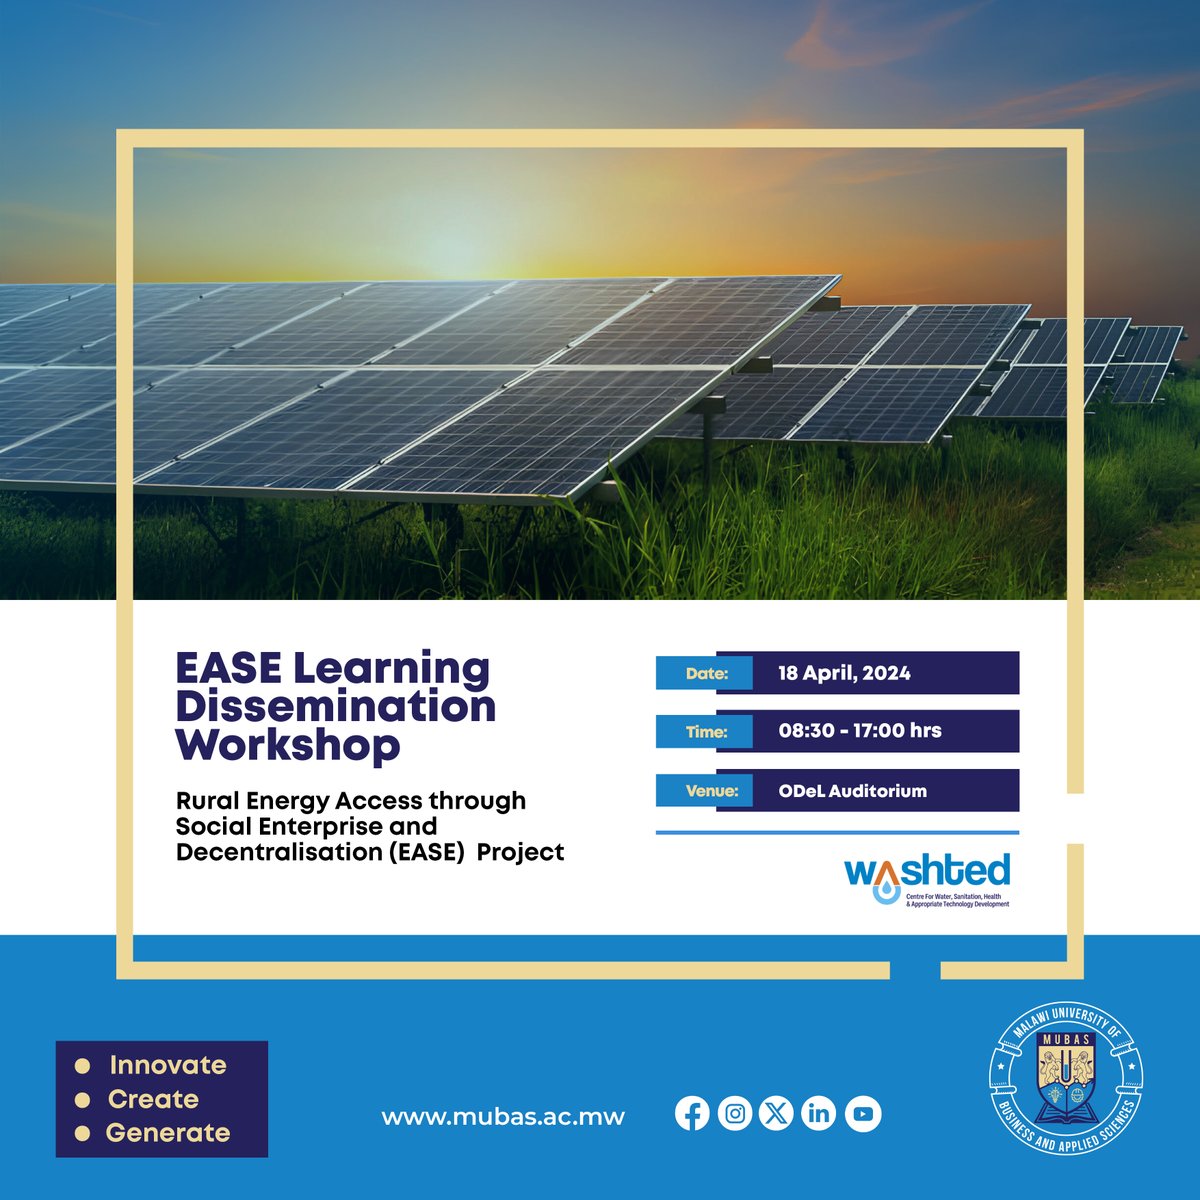 MUBAS is pleased to invite academic members of staff and students to the Rural Energy Access through Social Enterprise and Decentralization (EASE) Project Dissemination Event. #TheHomeOfInnovation #WASHTED #Innovate #Create #Generate